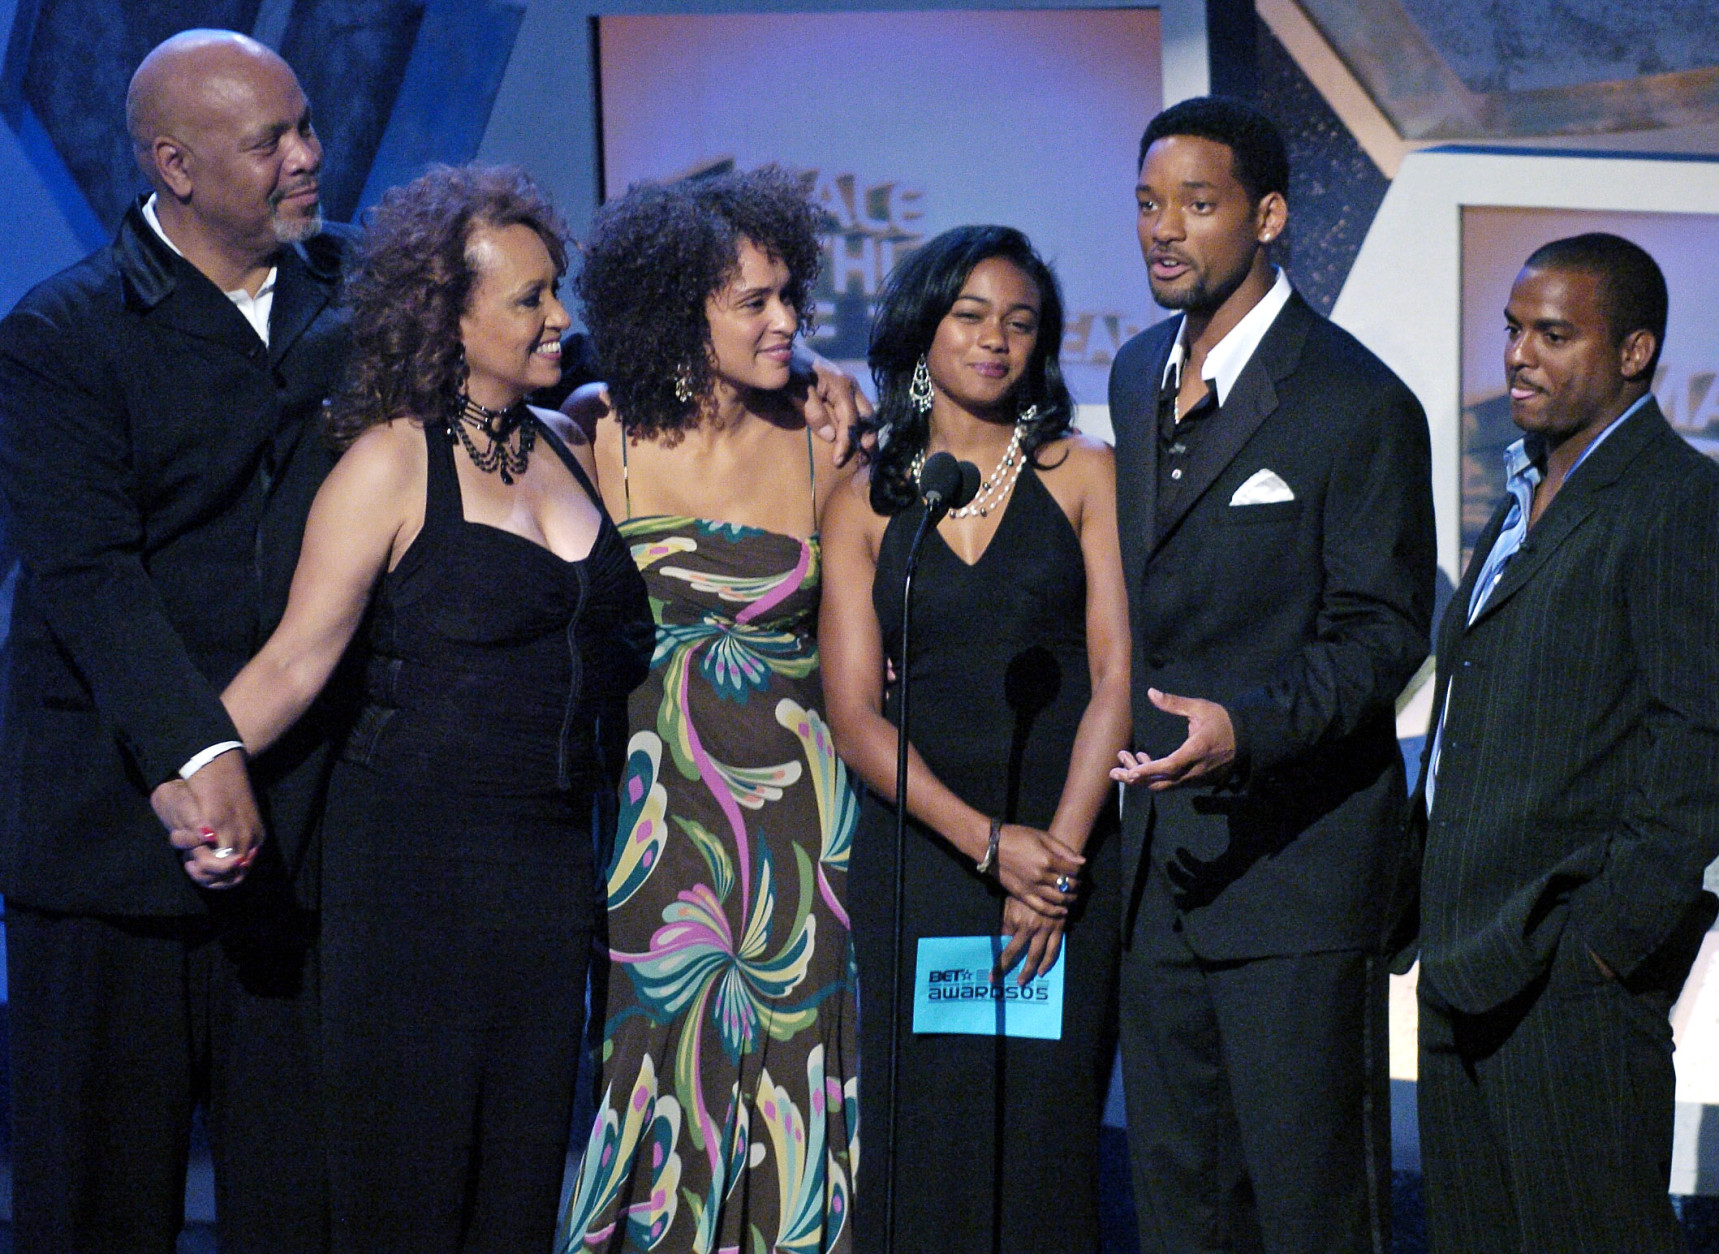 Host Will Smith, second from right, is joined by members of the original cast of the television comedy series "The Fresh Prince of Bel-Air" during the 5th annual BET Awards on Tuesday, June 28, 2005, in Los Angeles. (AP Photo/Chris Pizzello)